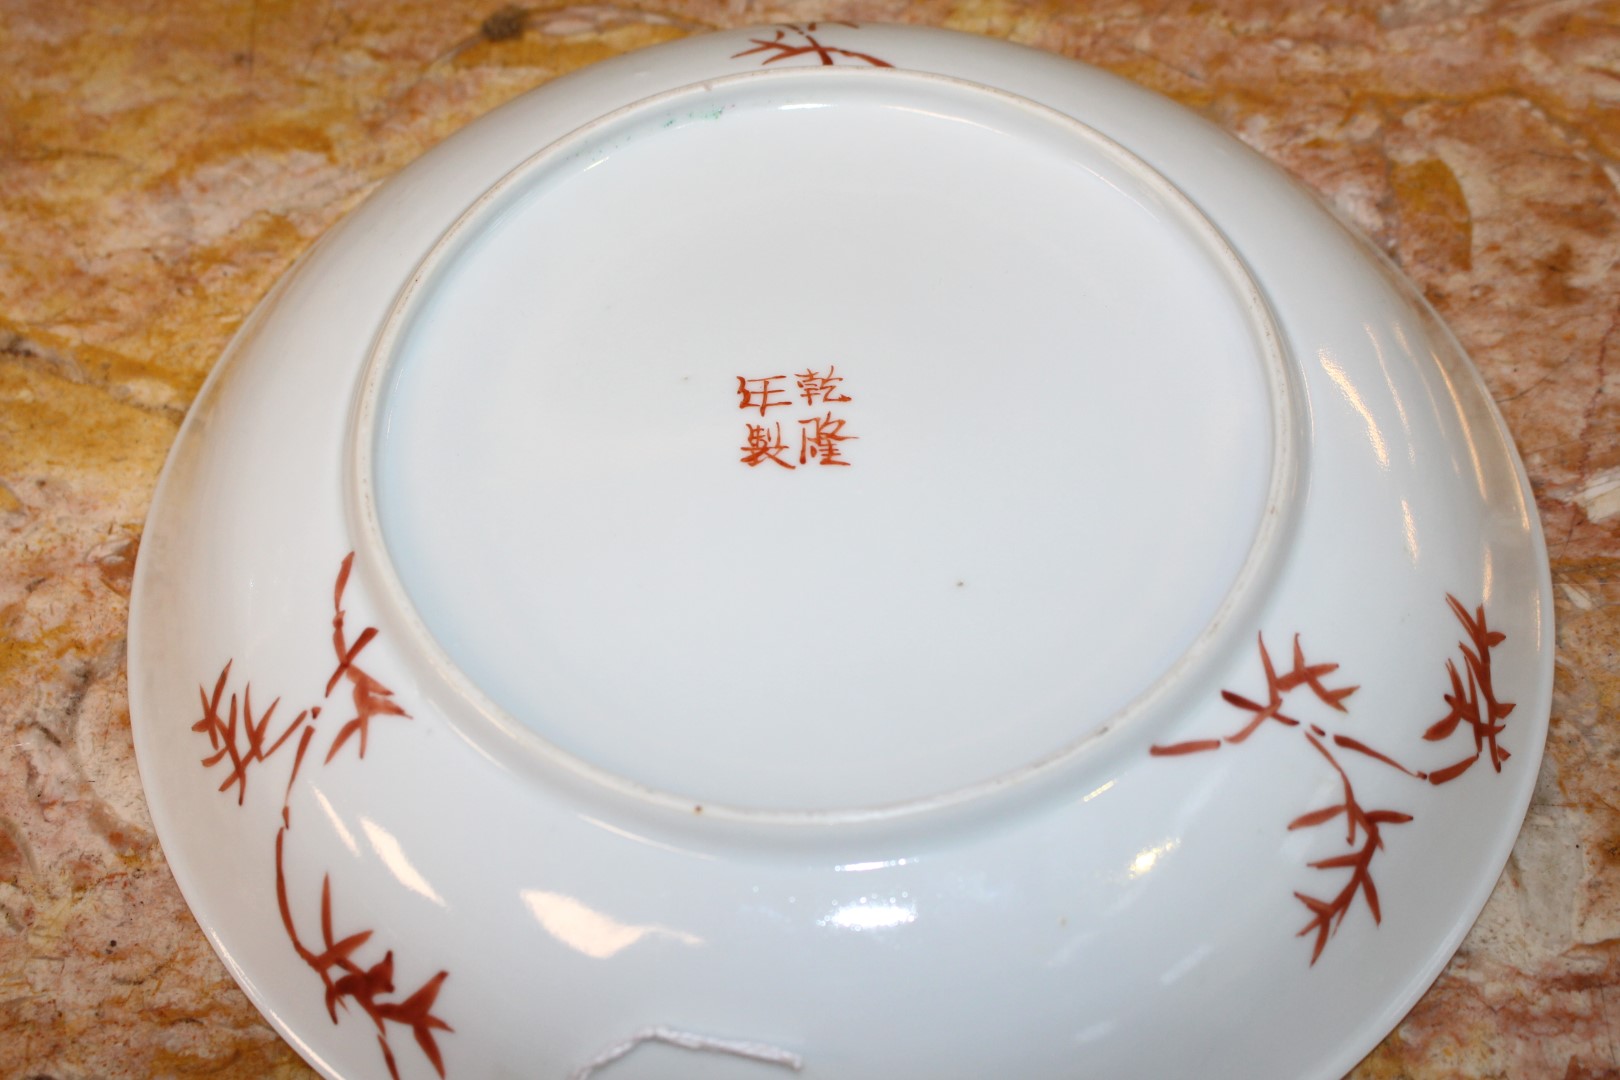 A PAIR OF CHINESE FAMILLE ROSE MILLEFIORE PORCELAIN DISHES, on a white ground, - Image 3 of 7